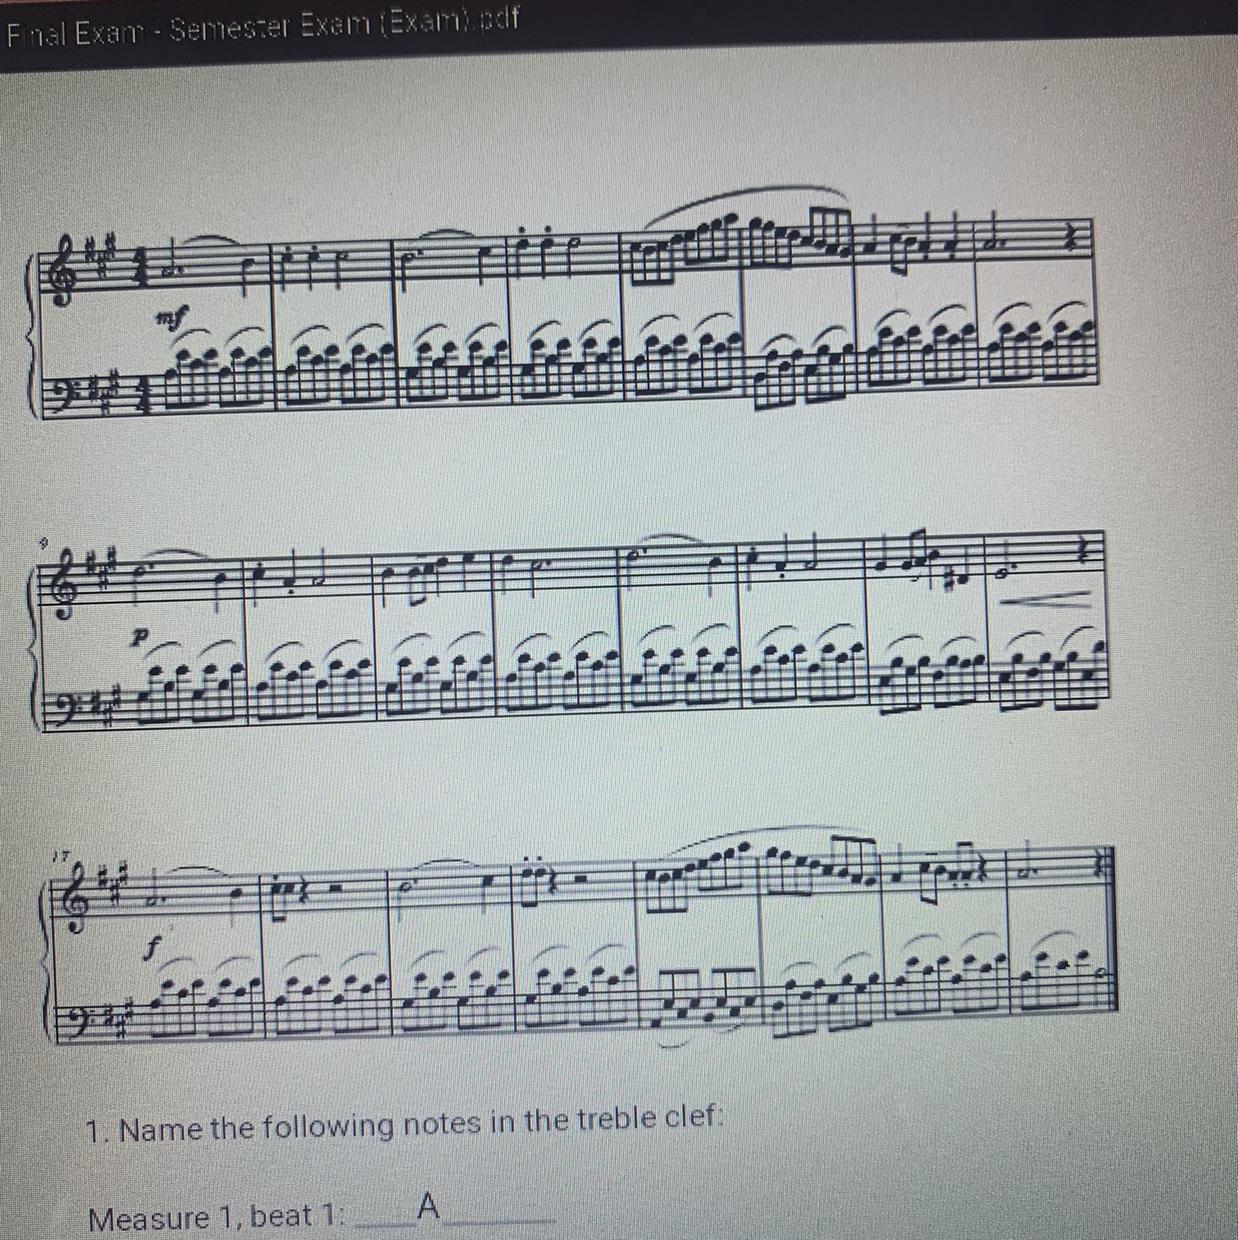 8. Which Of The Following Skills Match The Key Of This Piece? Circle Your Answer, And Name The Scale.